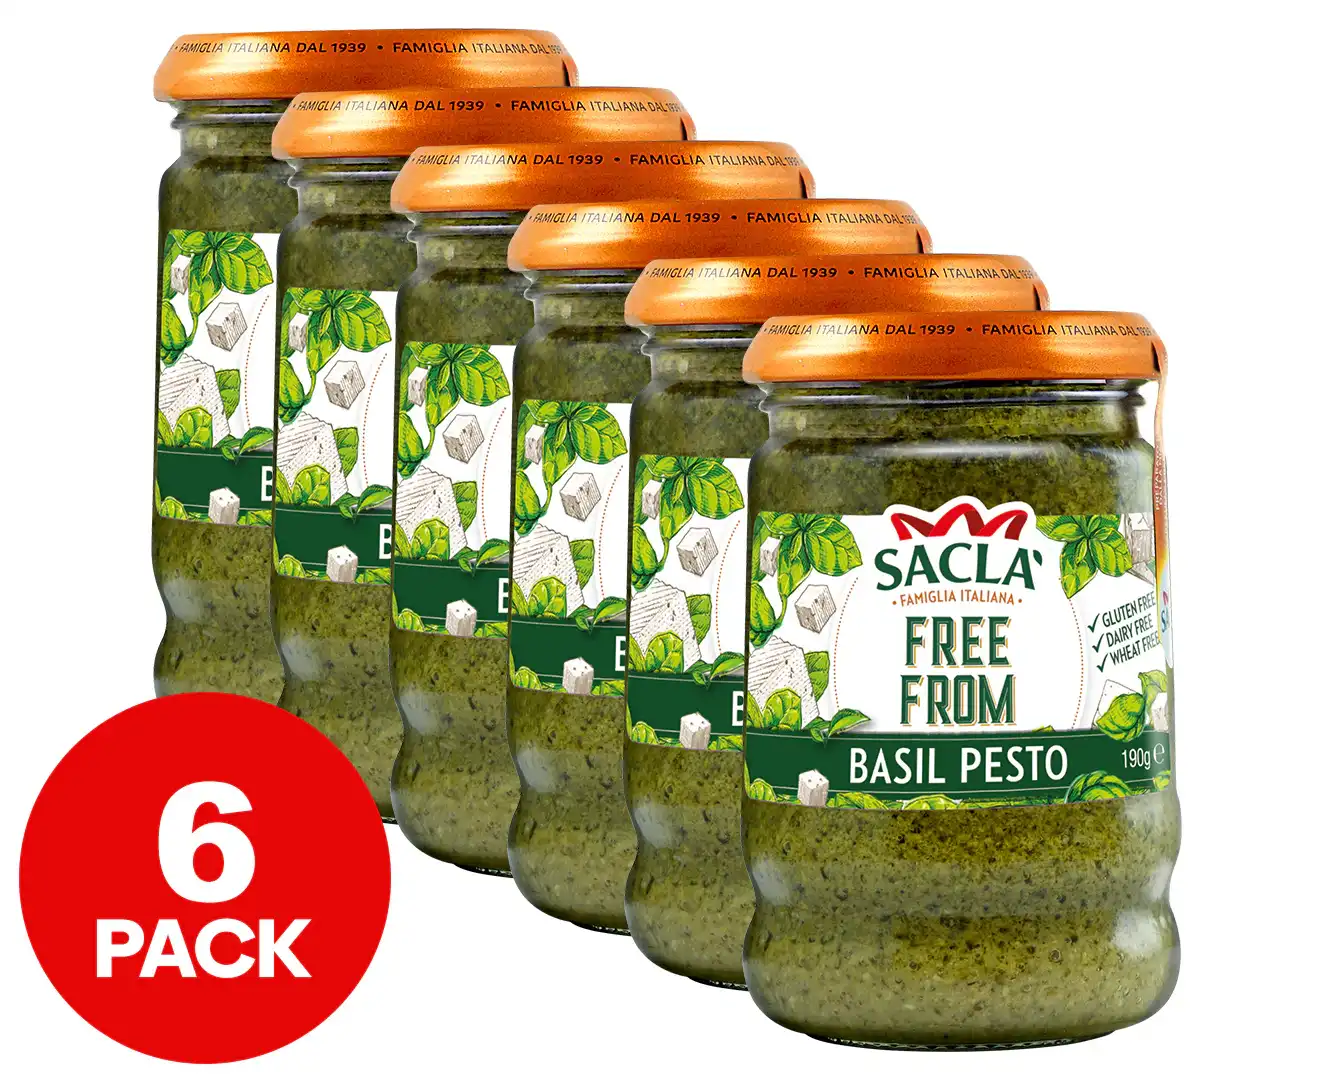 6 x Saclà Free From Basil Pesto 190g now $24.70(was $26) at Catch